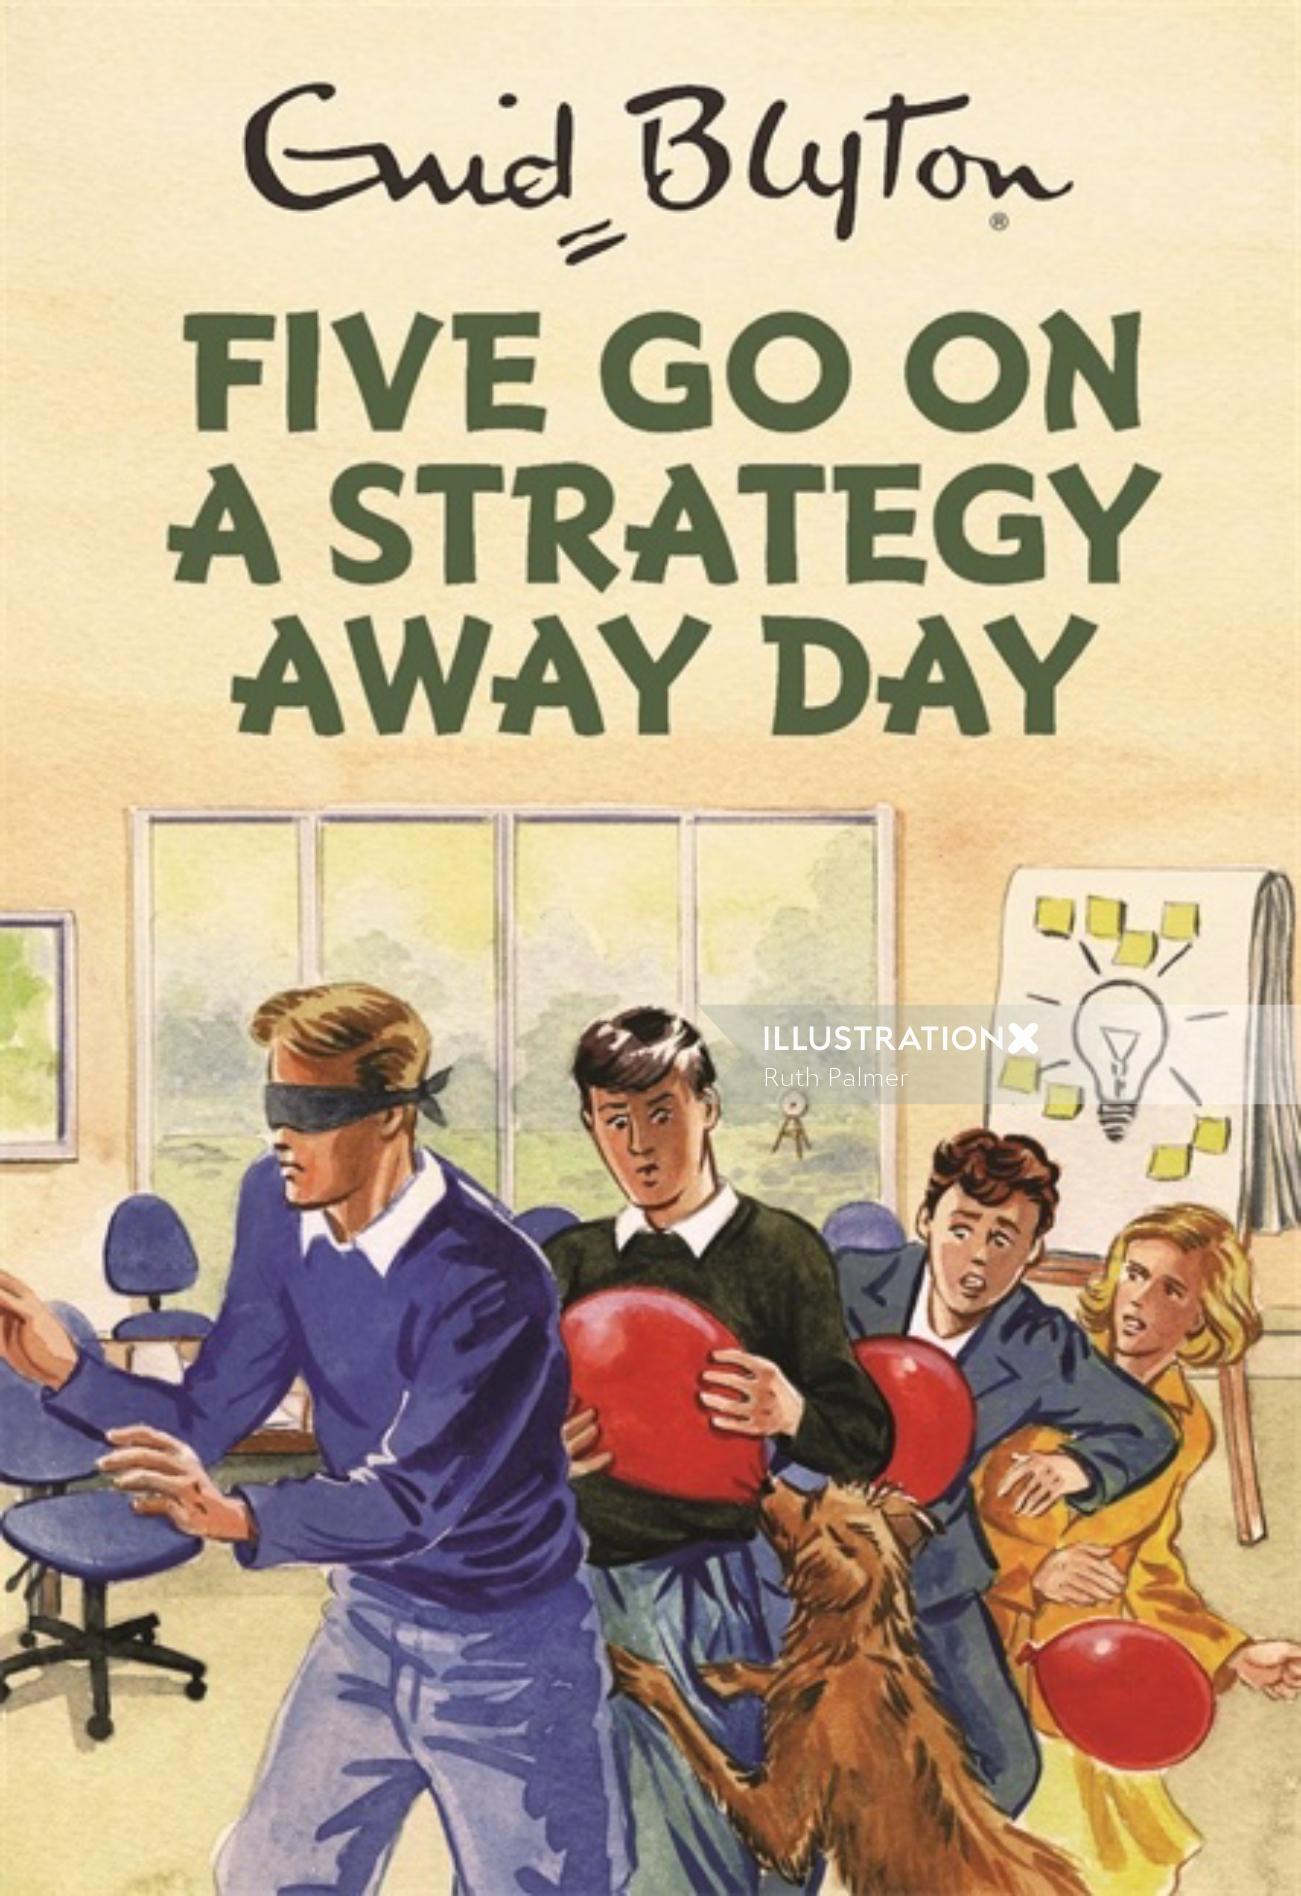 Five go on a strategy away day book cover